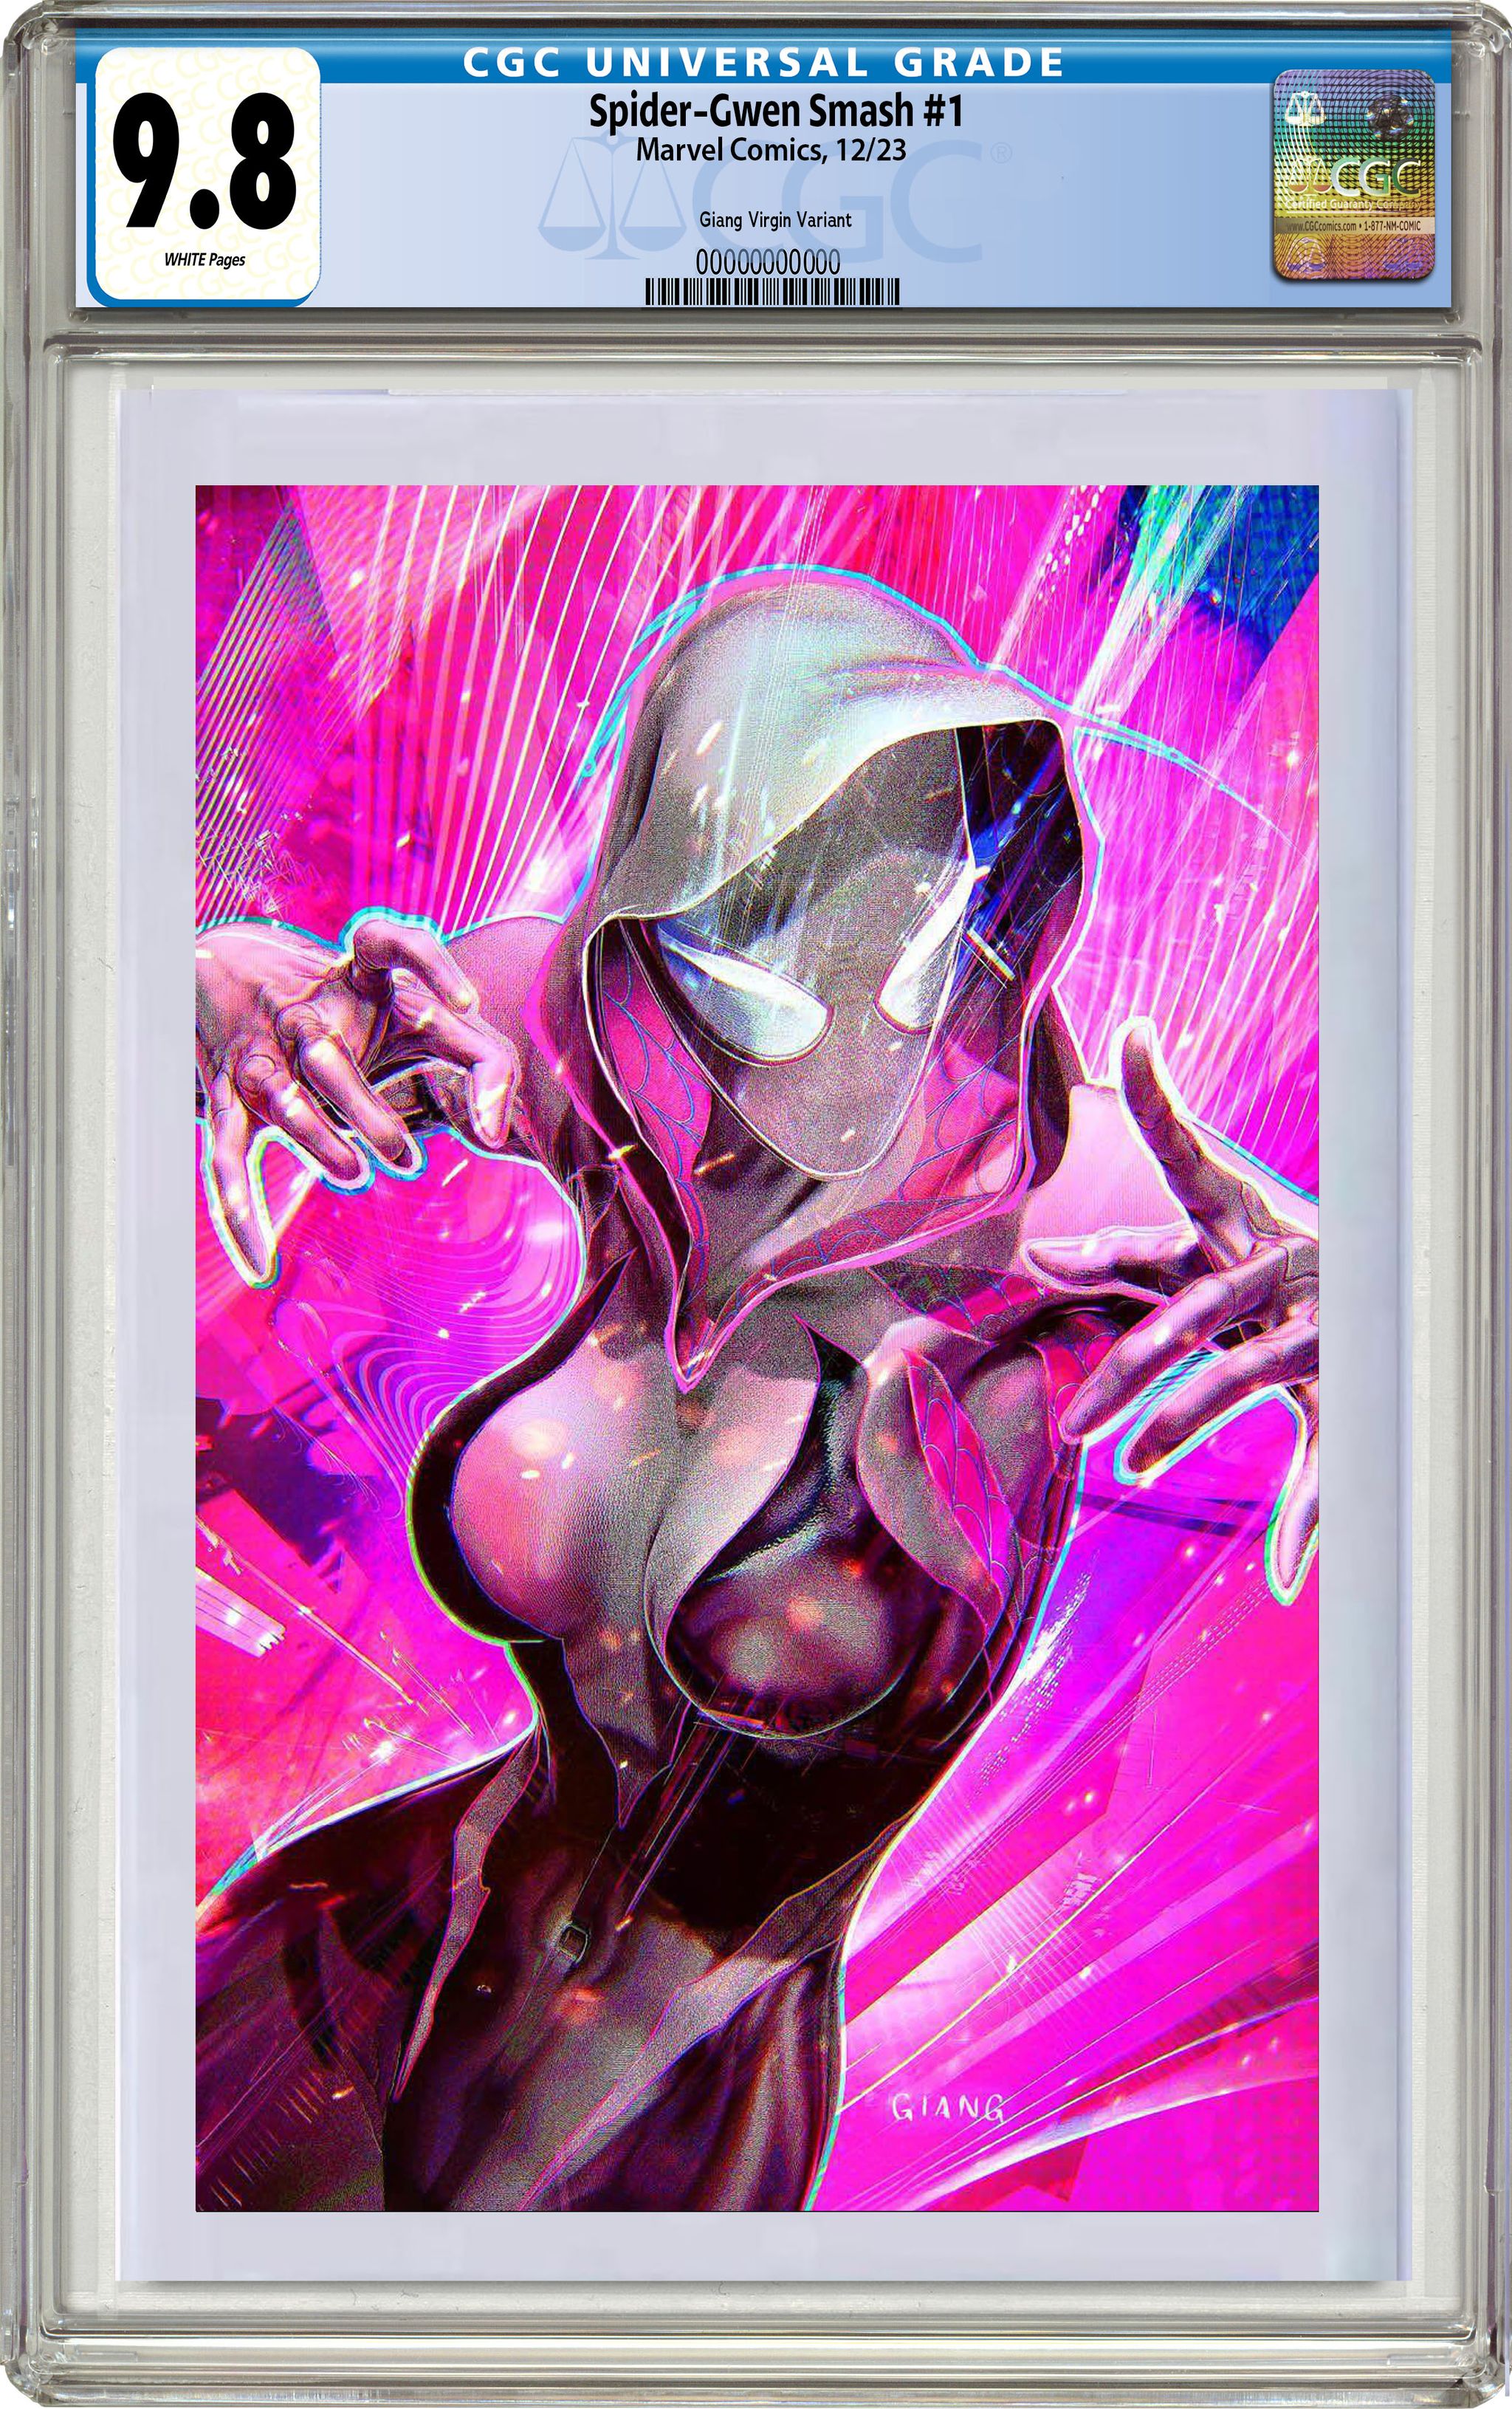 SPIDER-GWEN: SMASH 1 JOHN GIANG EXCLUSIVE VARIANT COVER OPTIONS 12/13/23